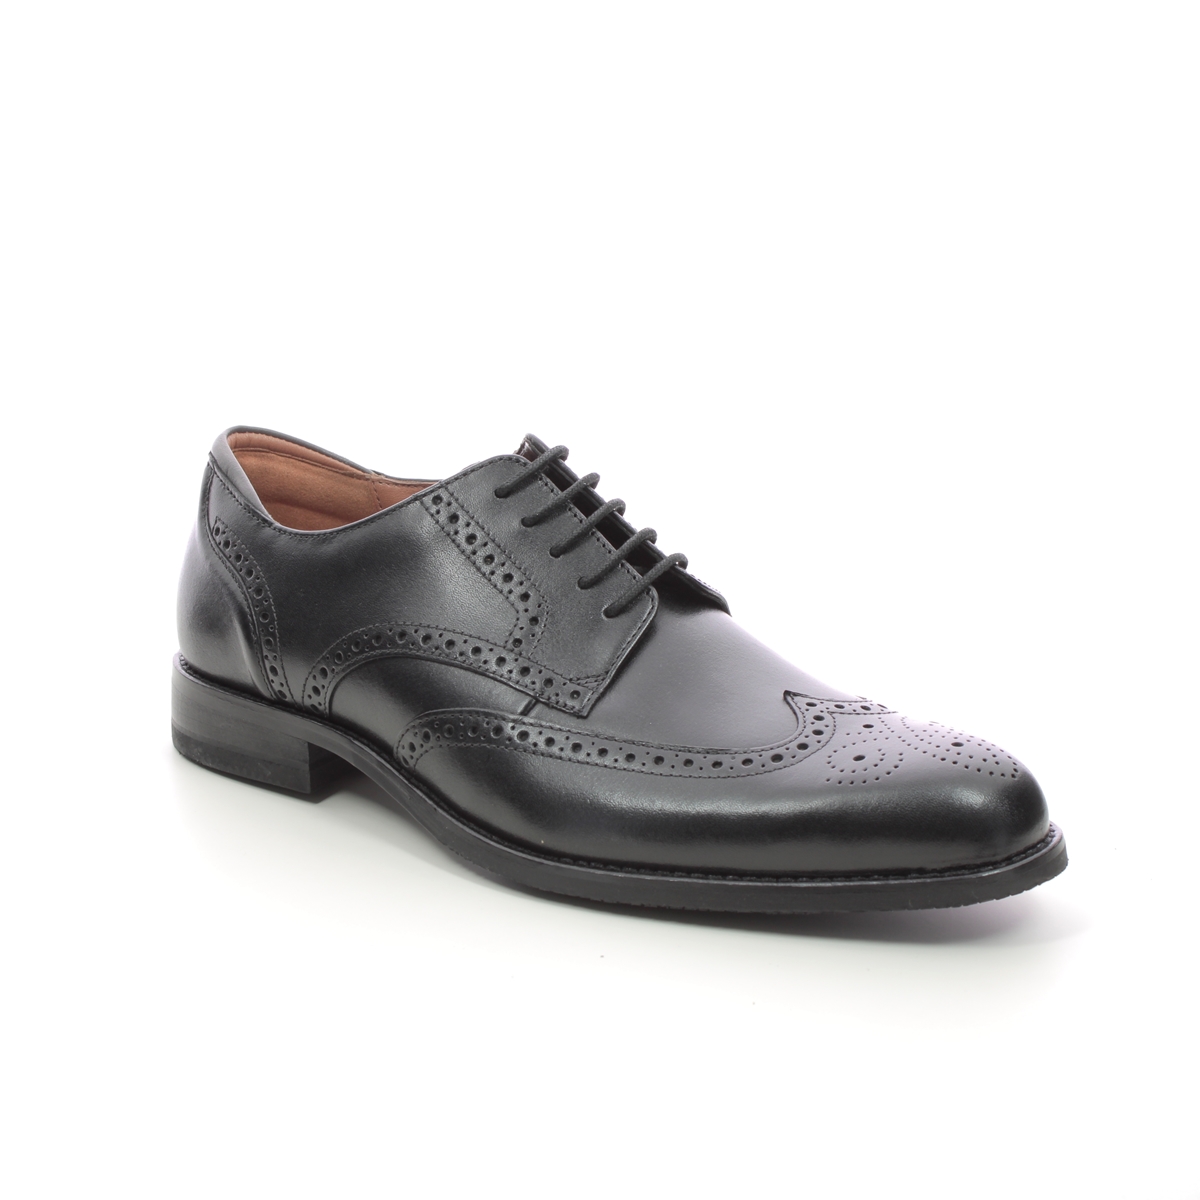 Clarks Craftarlo Limit Black leather Mens Brogues 7145-27G in a Plain Leather in Size 11